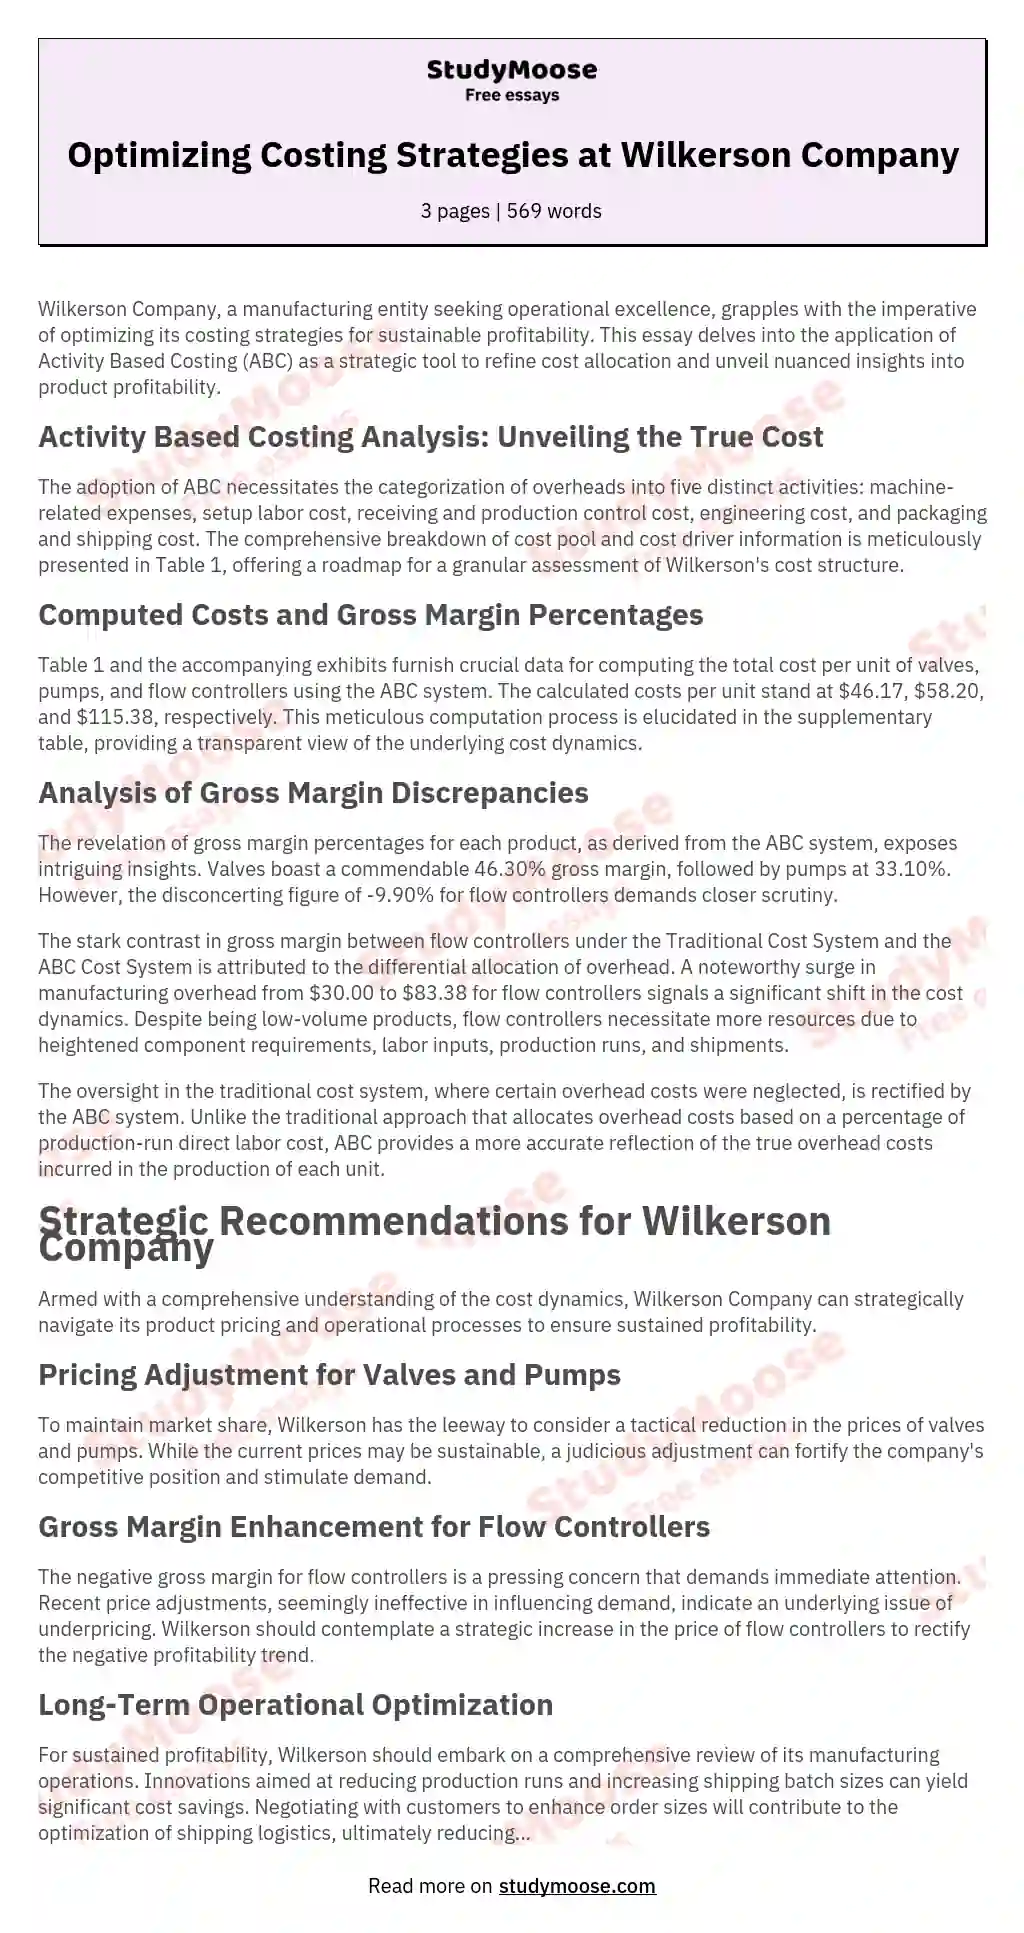 Optimizing Costing Strategies at Wilkerson Company essay